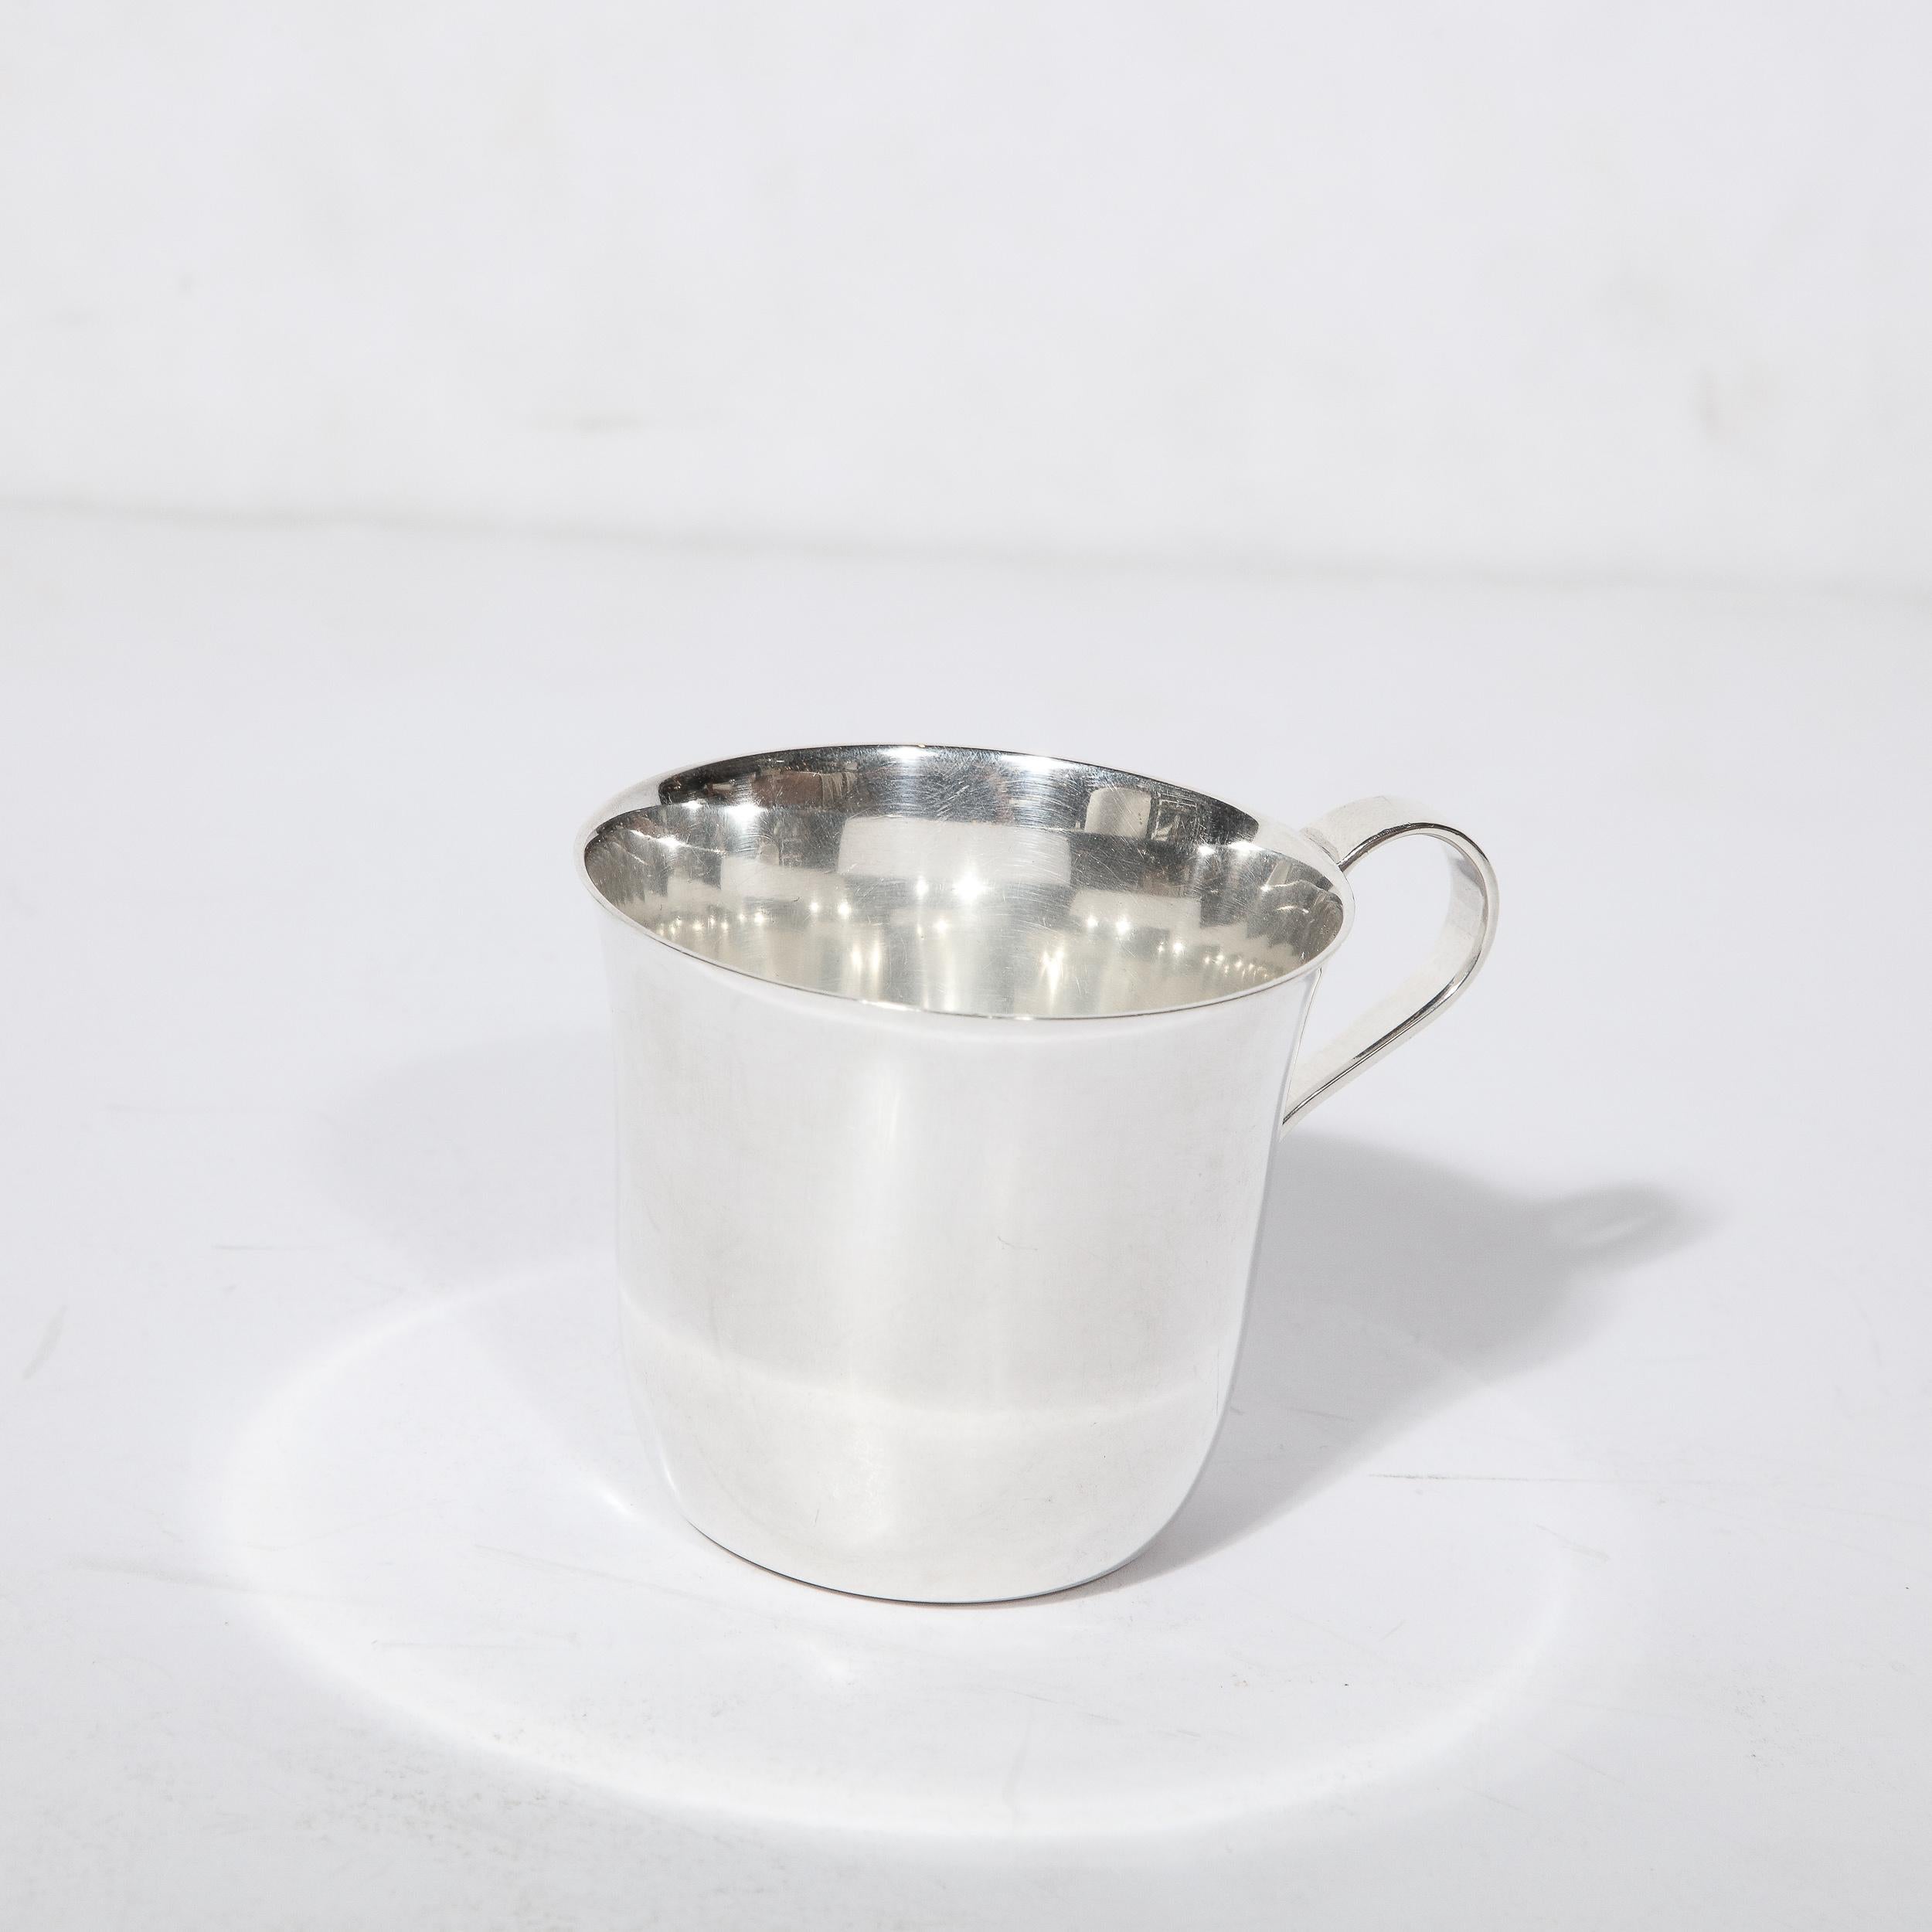 This lovely Tiffany and Co. Sterling Silver Handled Cup originates from the United States during the 20th Century. Featuring a minimalist construction in beautiful proportions, the piece is rendered in sterling silver and beautifully polished. With